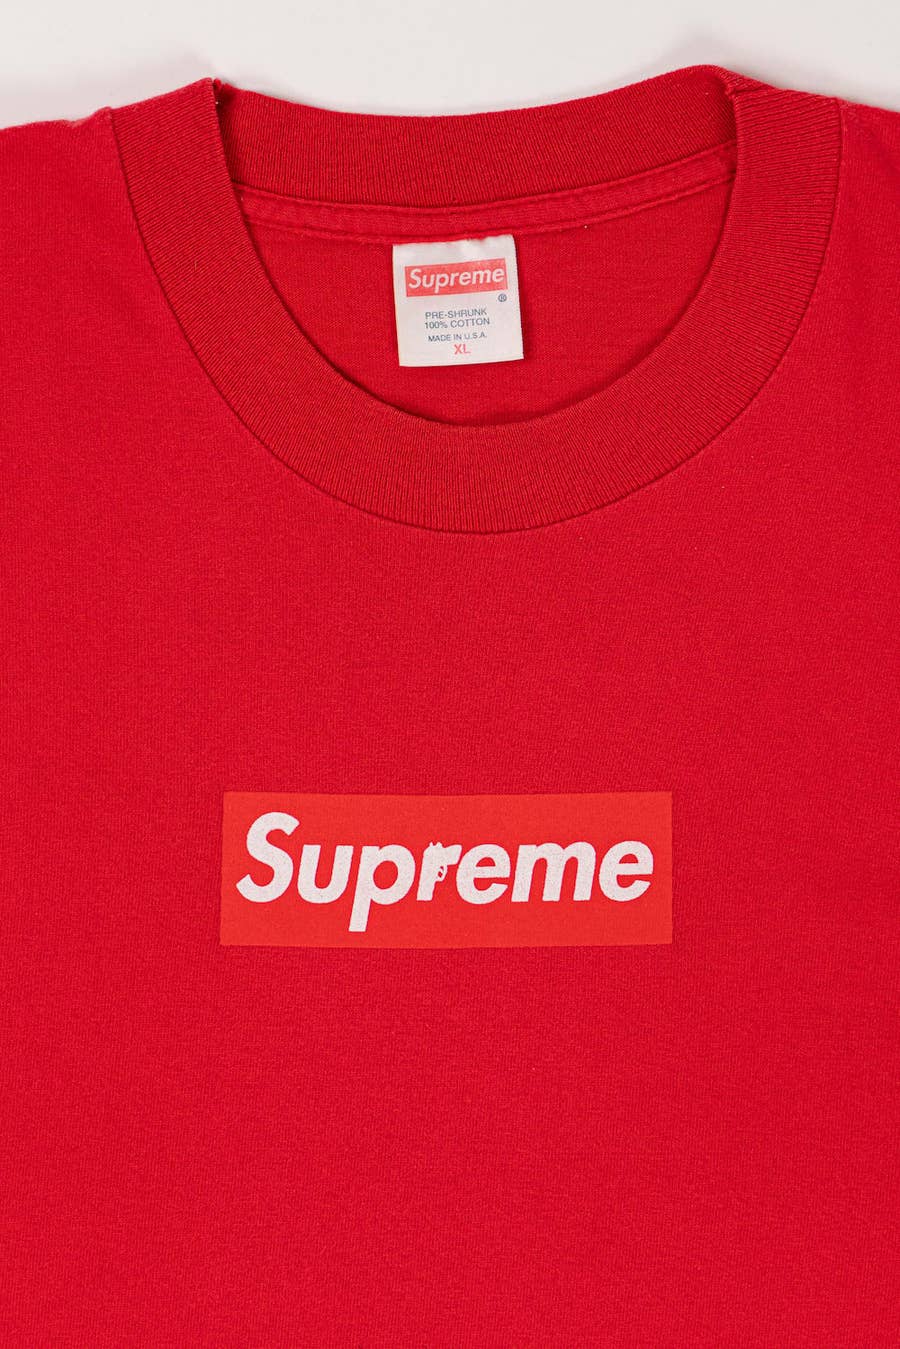 How a 21-Year-Old Supreme Collector Purchased Every Single Box Logo T-Shirt